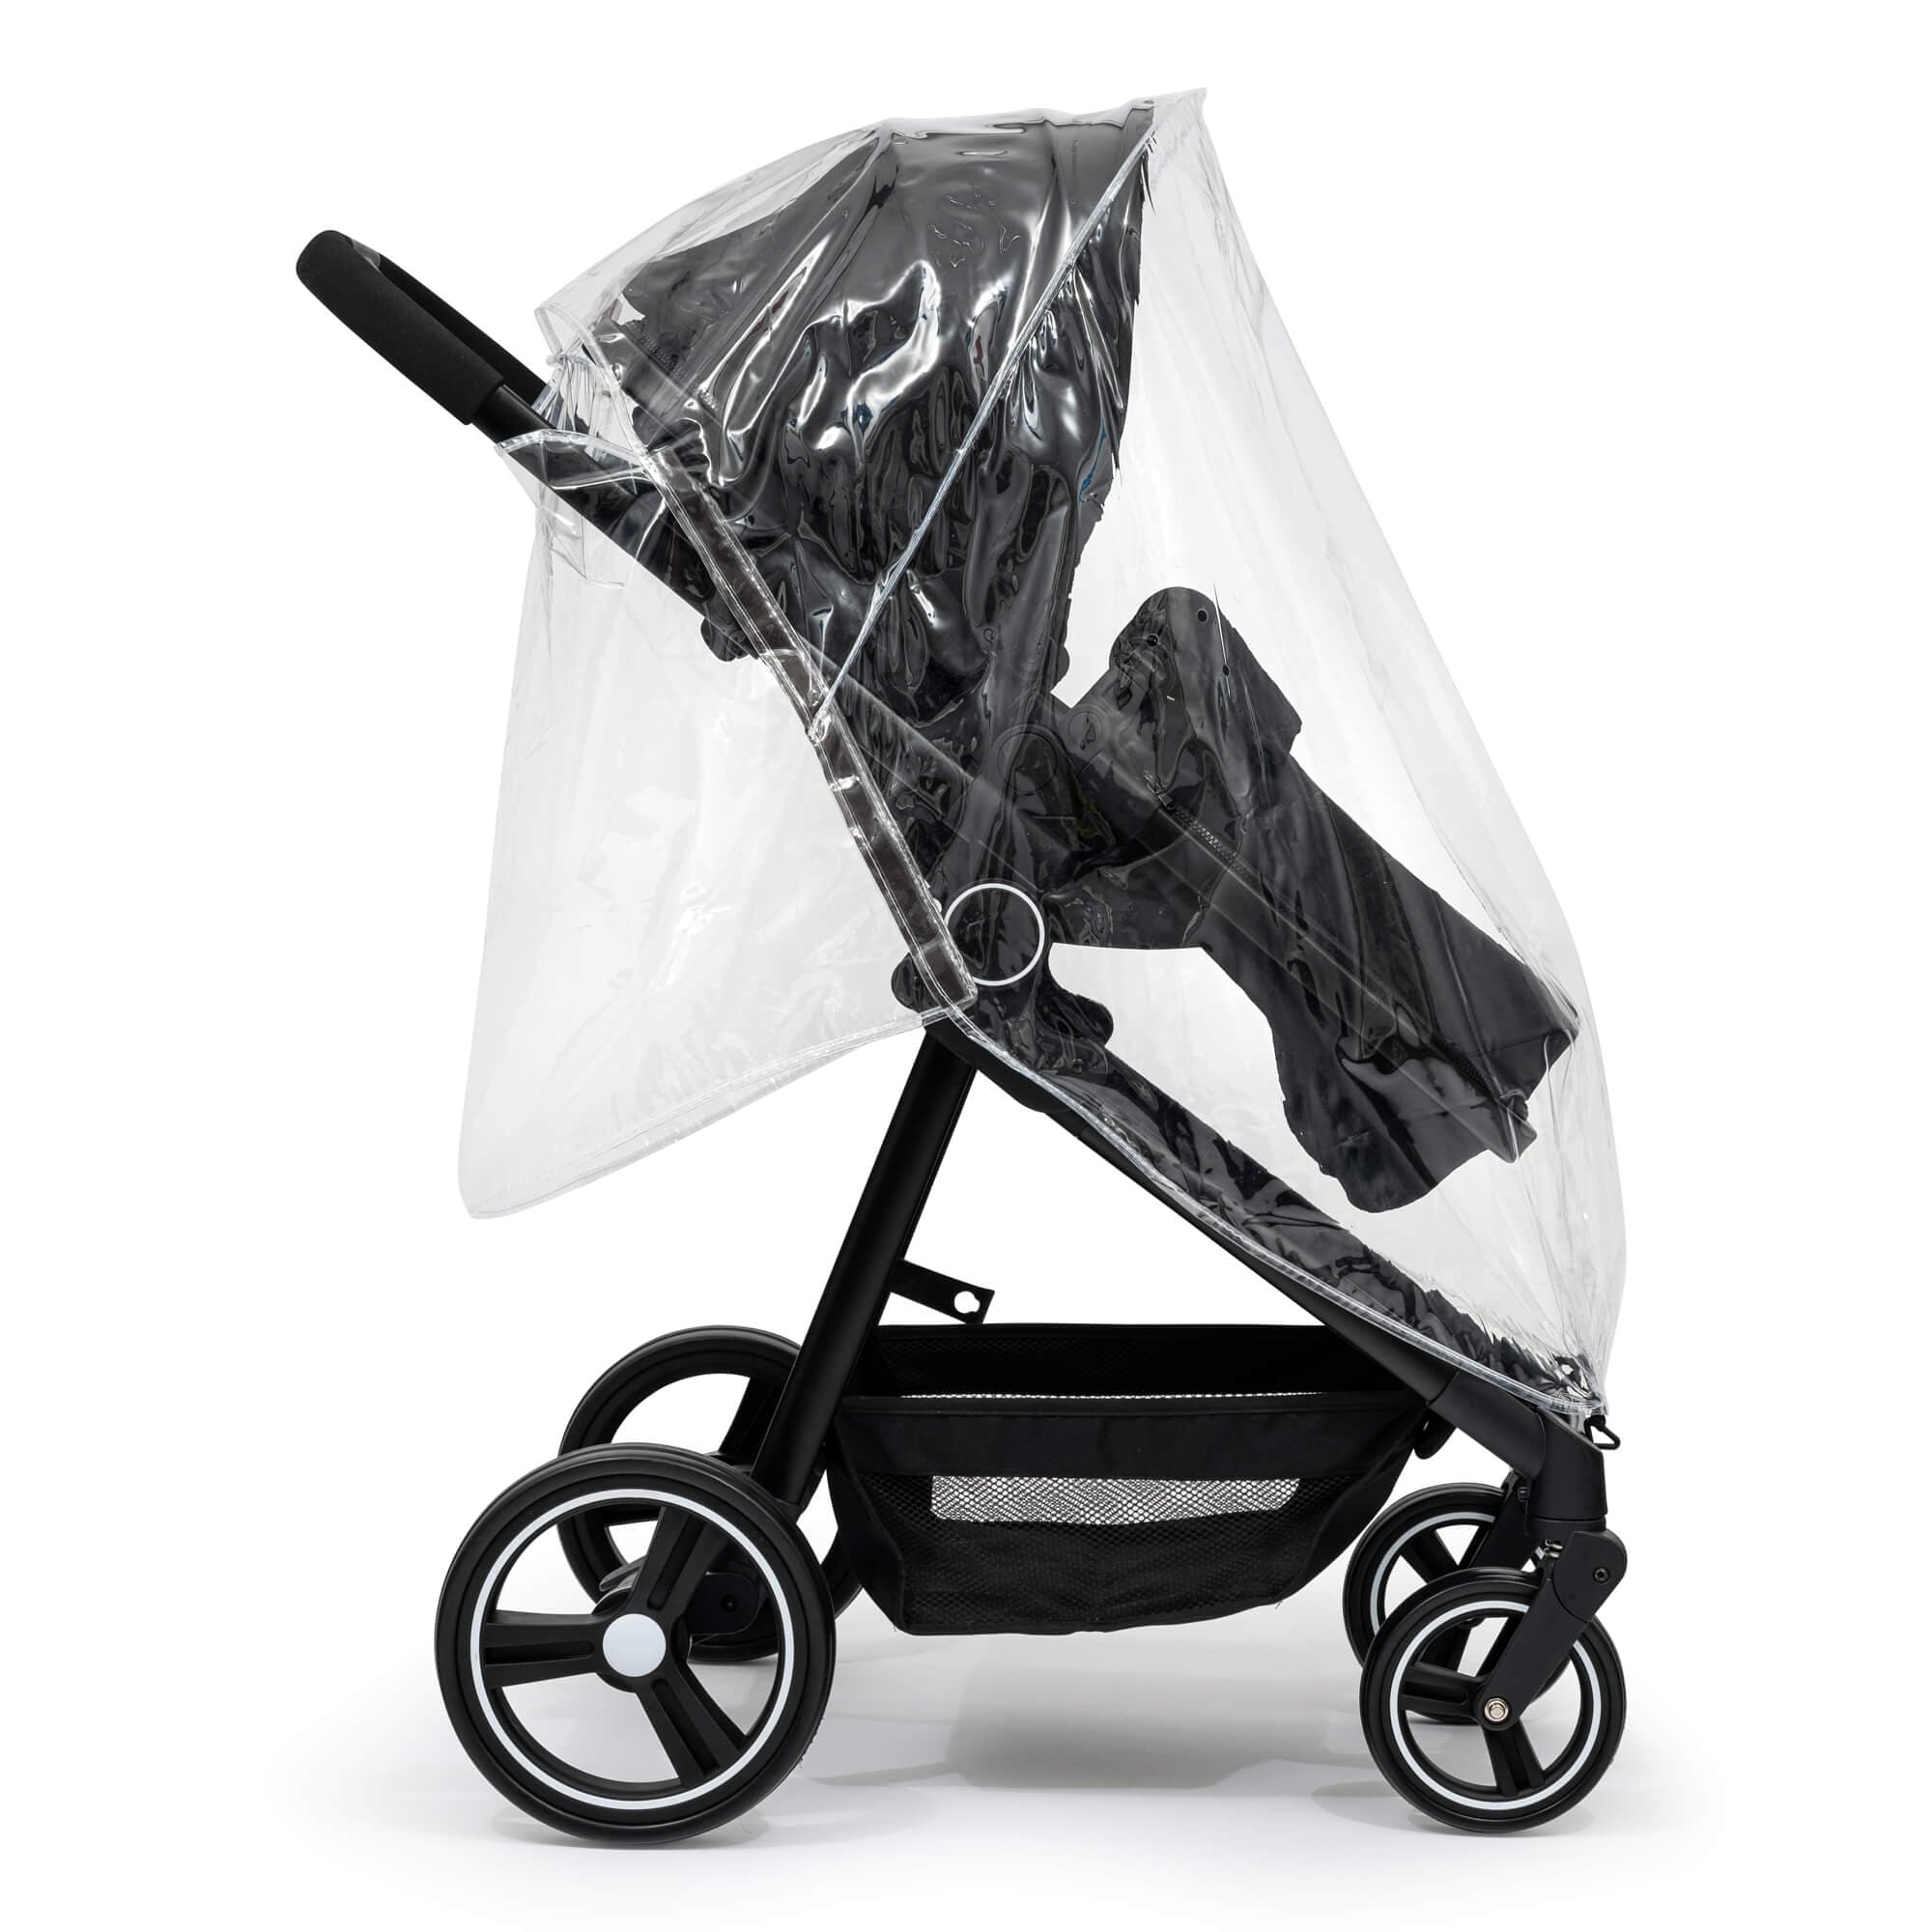 Pushchair Raincover Compatible With Bebecar - For Your Little One